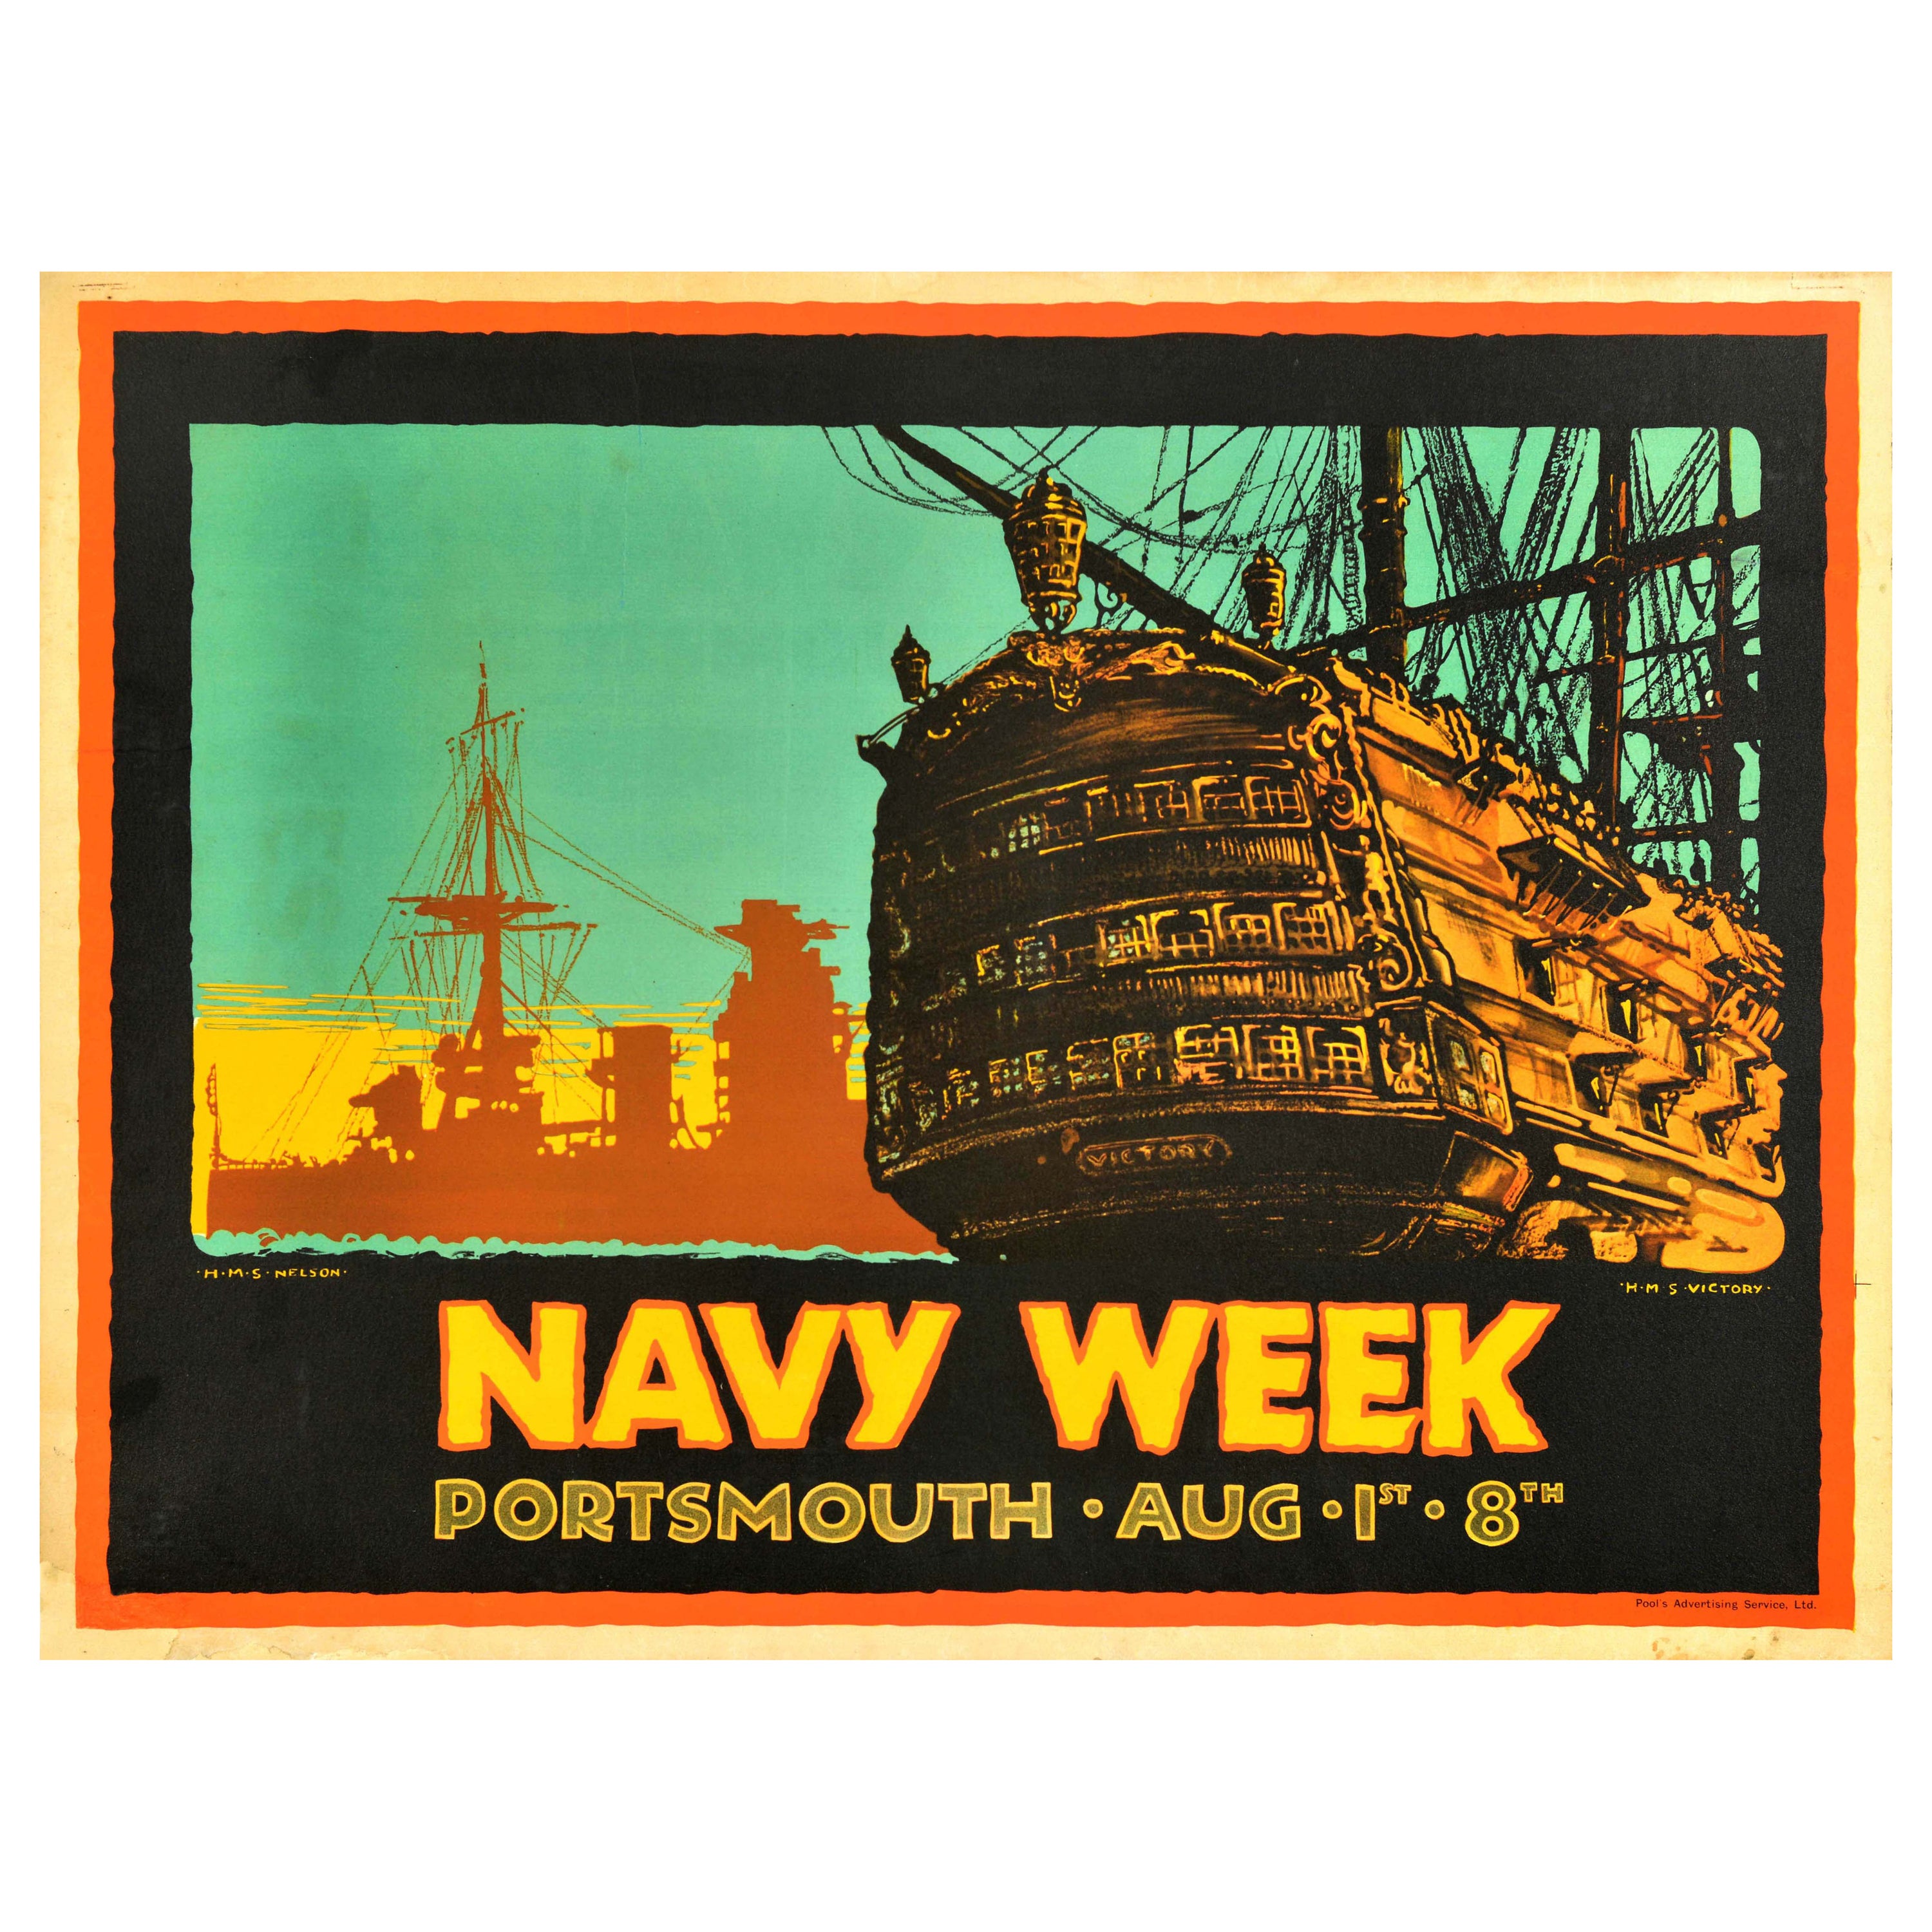 Original Vintage Advertising Poster Navy Week Portsmouth HMS Nelson Victory Ship For Sale